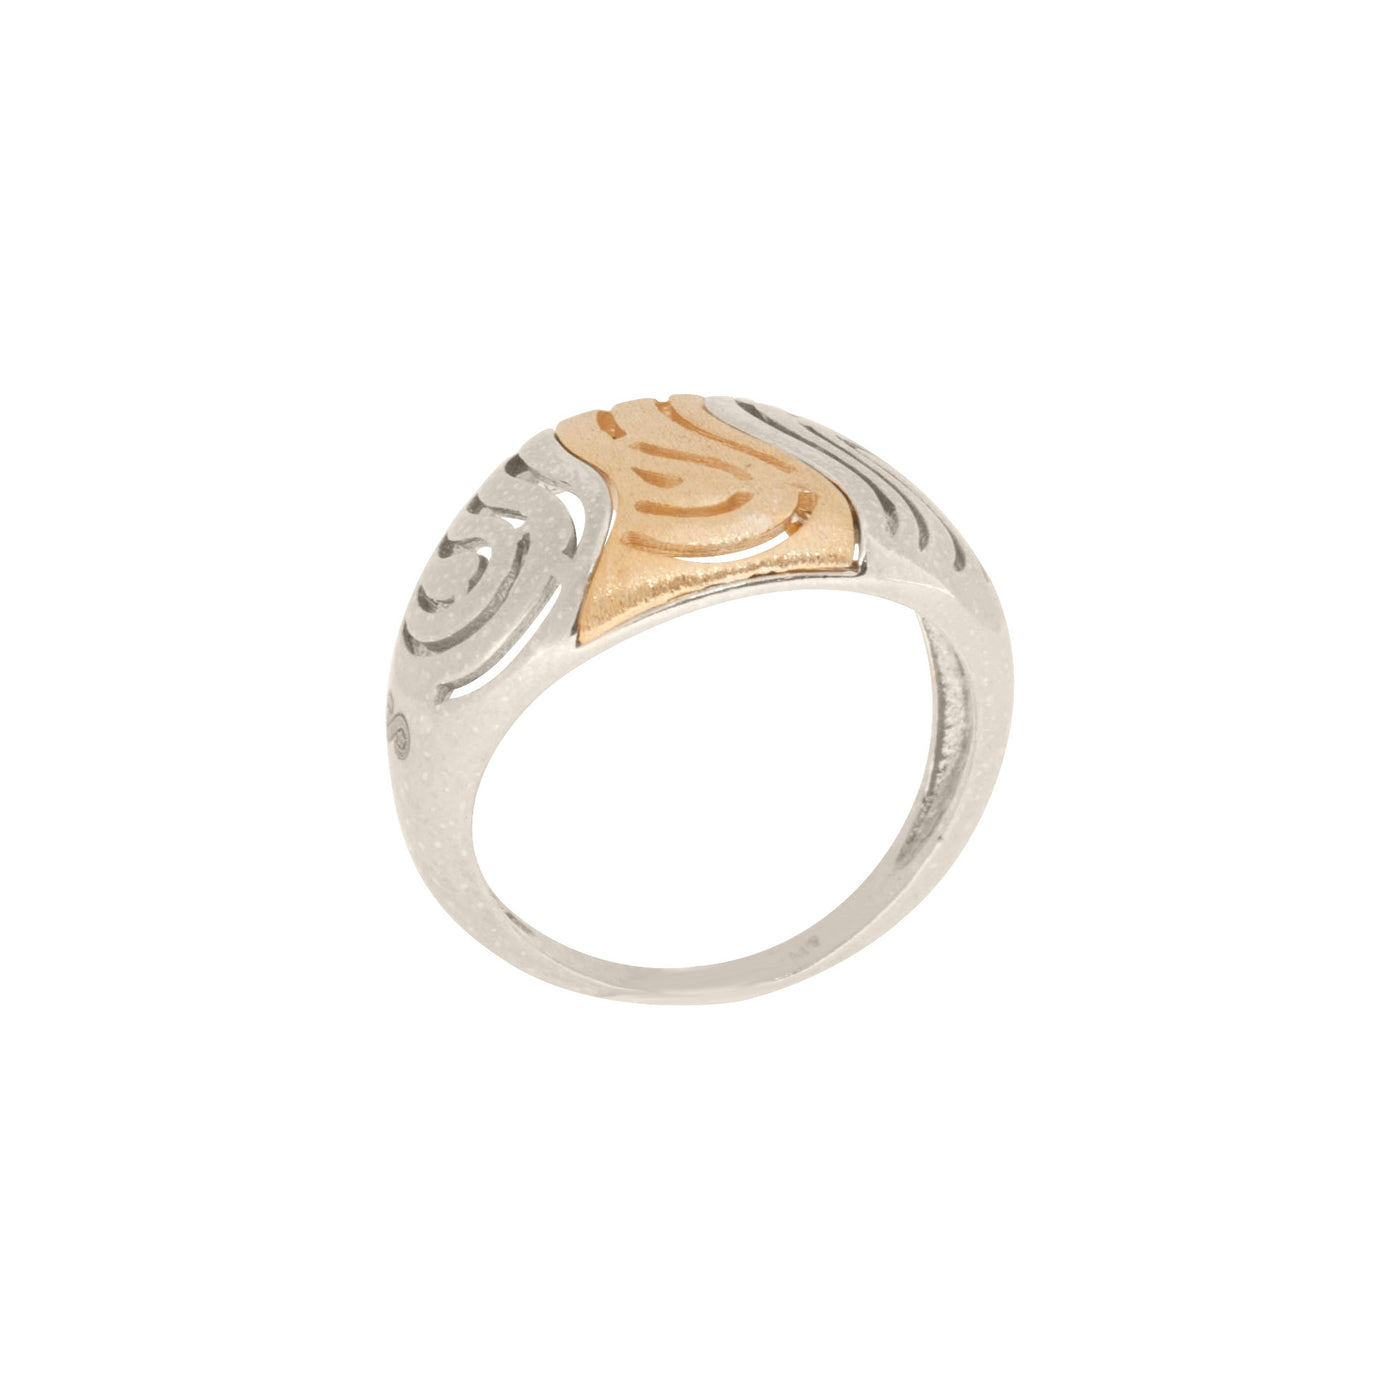 Rebecca Sloane Silver and Gold Plated Open Swirl Design Ring